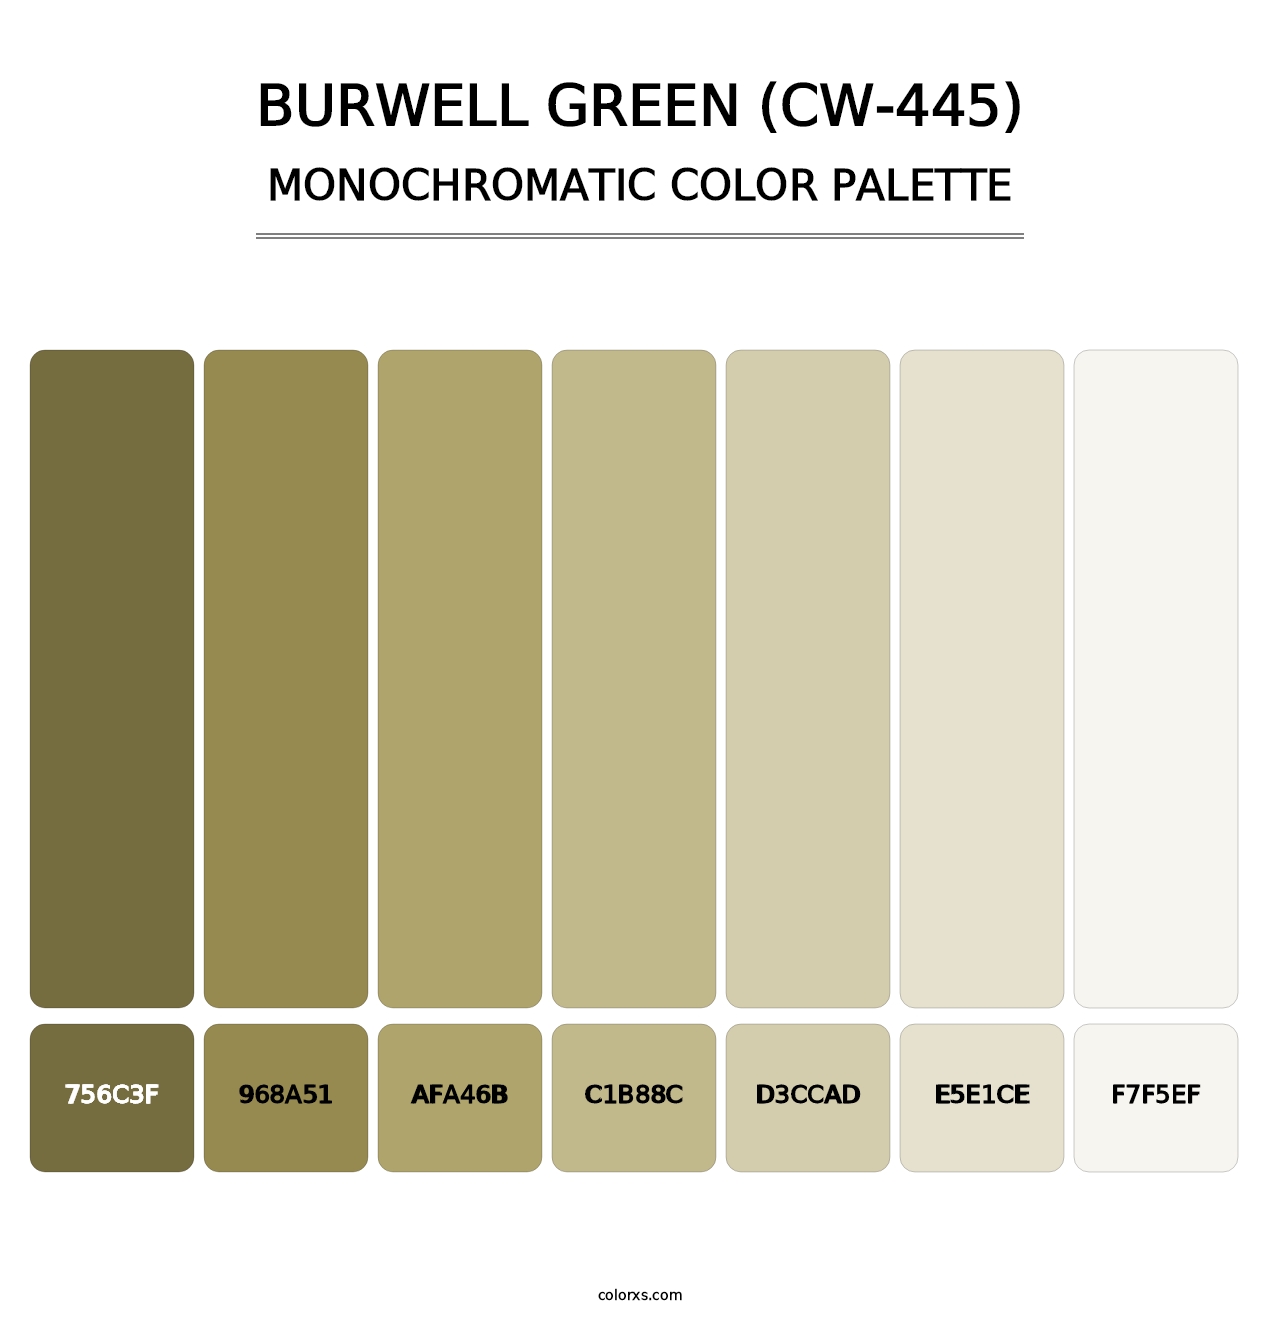 Burwell Green (CW-445) - Monochromatic Color Palette